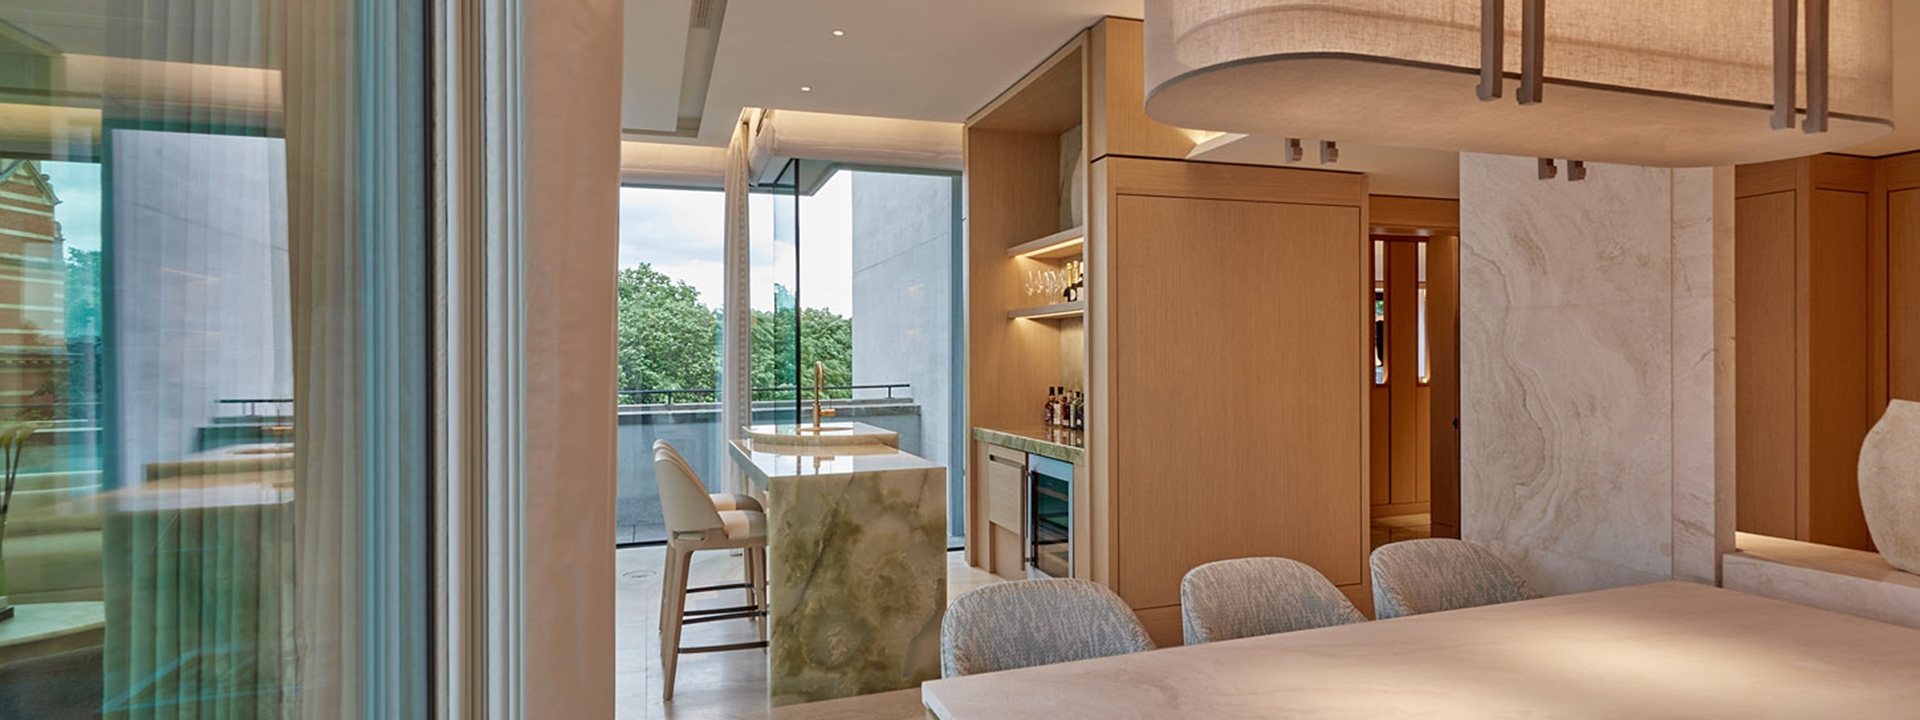 Knightsbridge Pavilion Penthouse - view of the kitchen with dining table in the foreground.